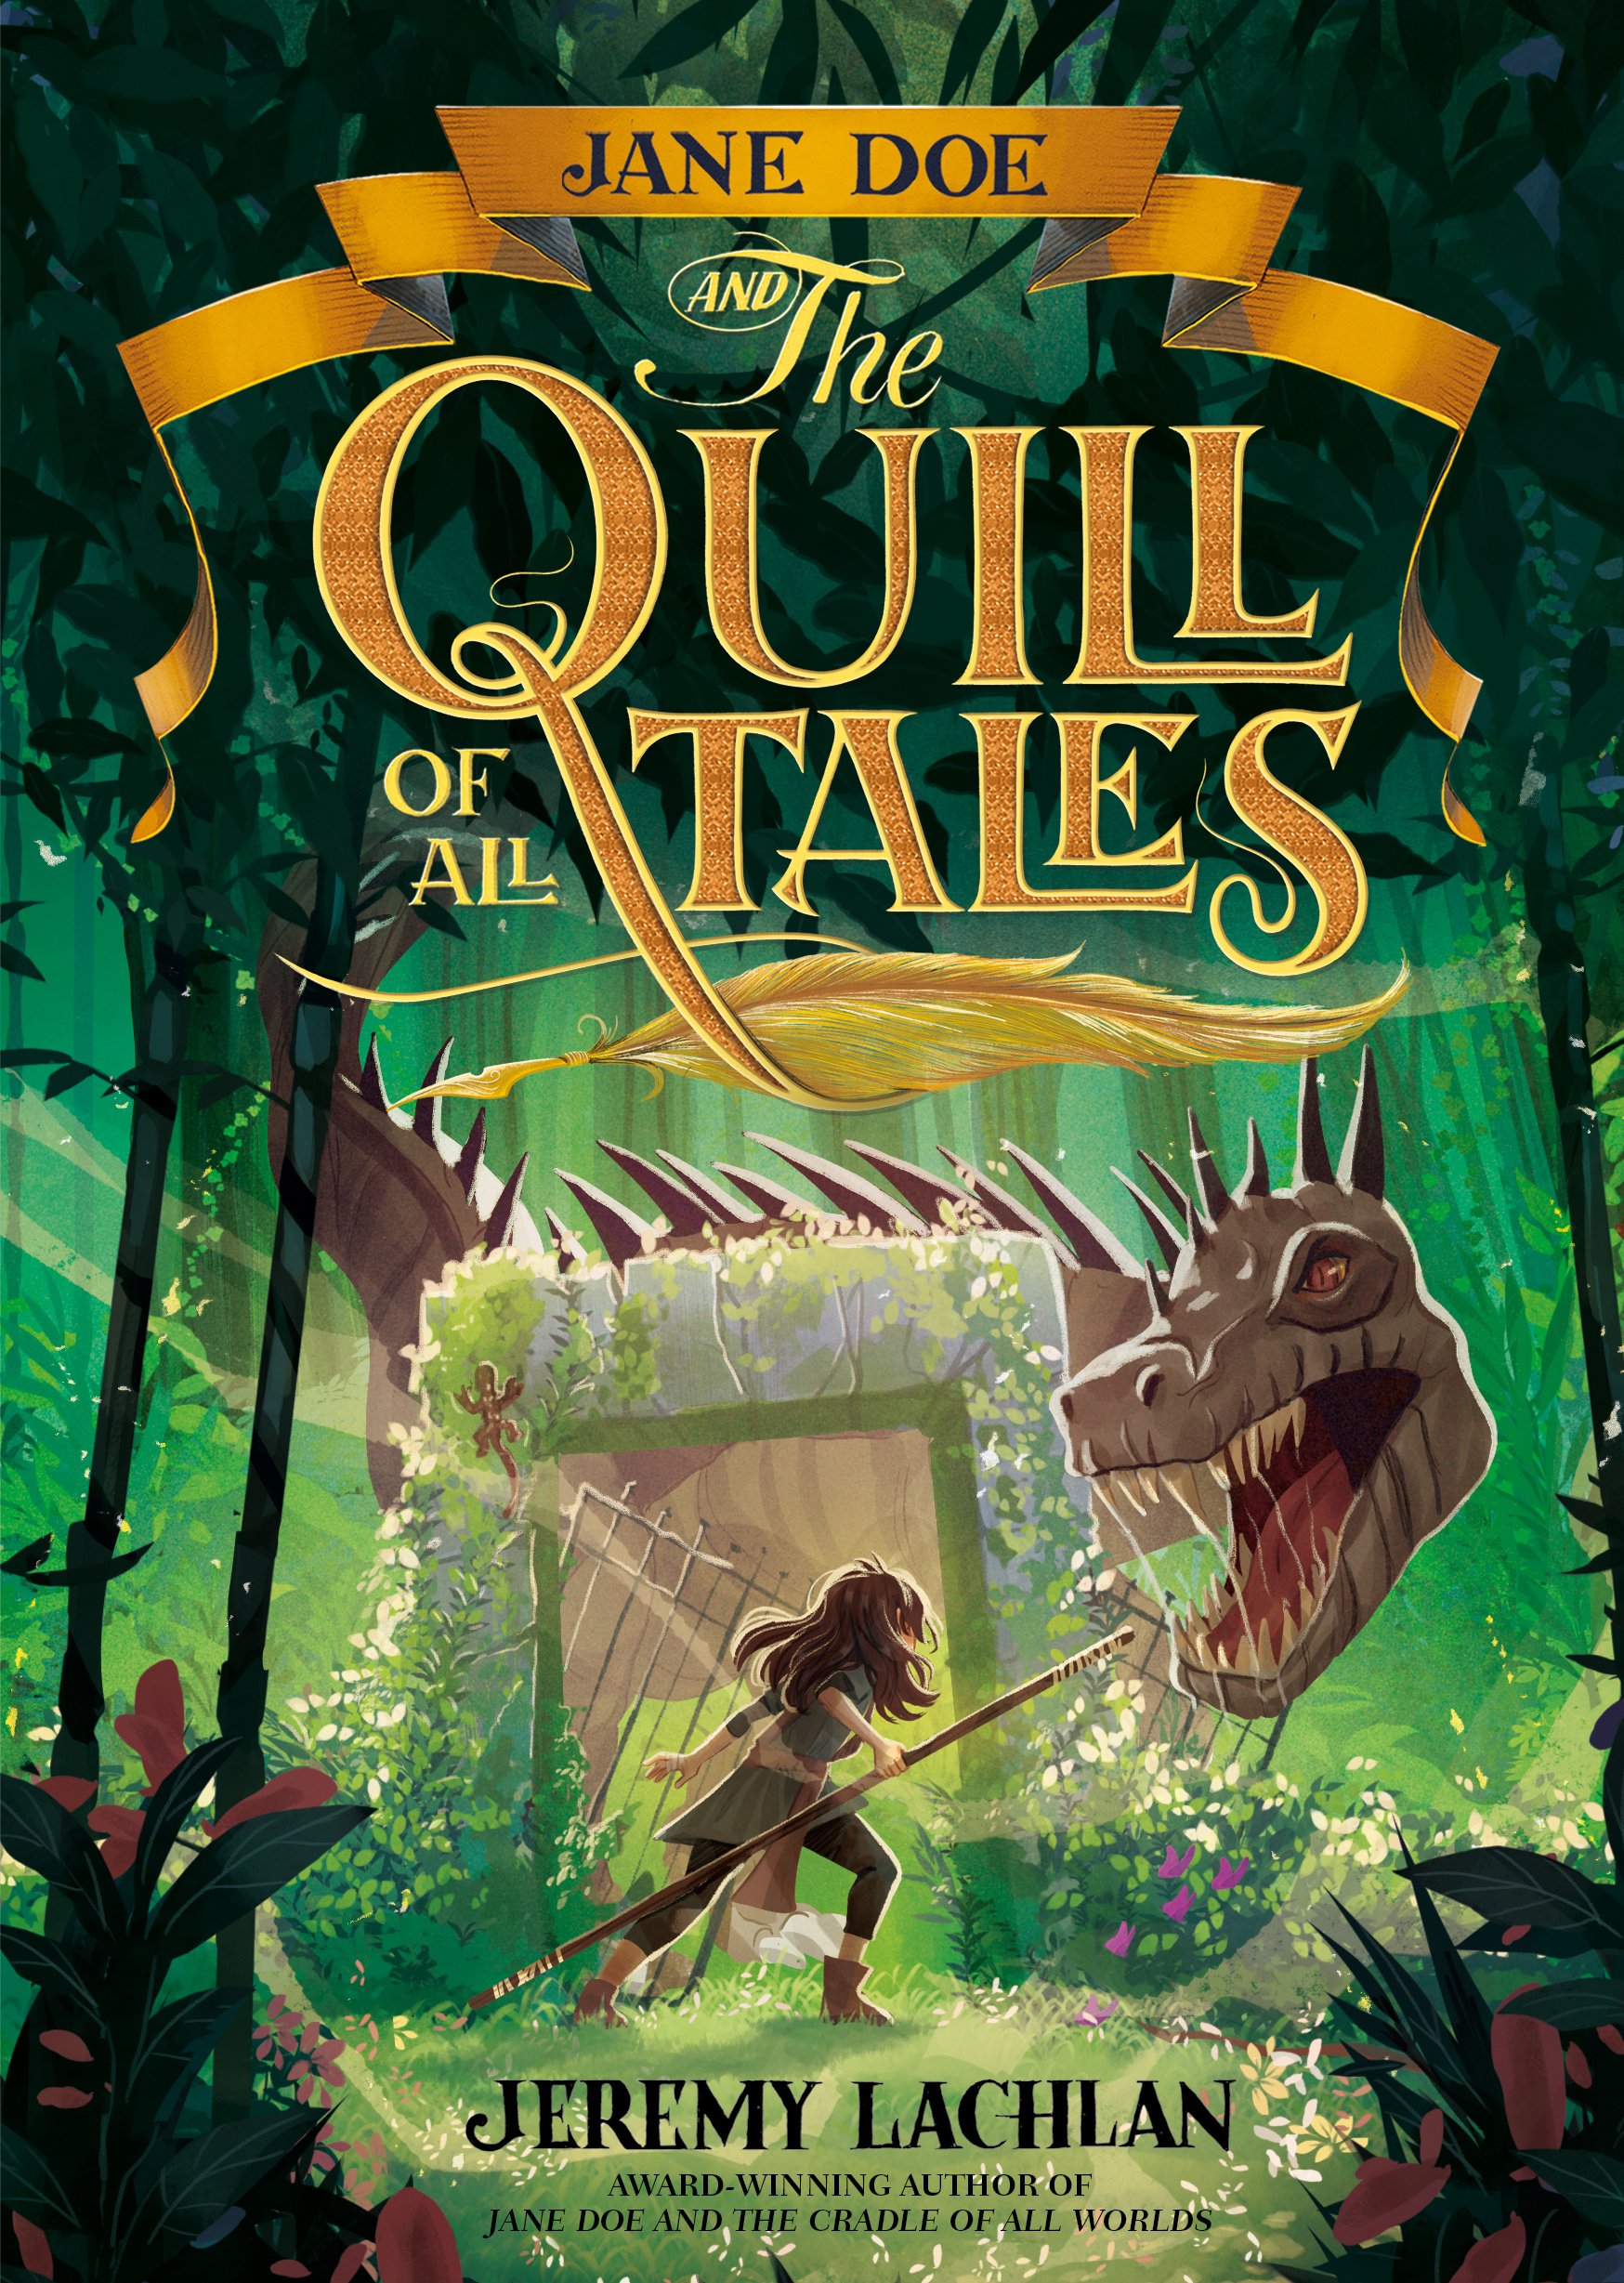 book cover image jane doe the quill of all tales